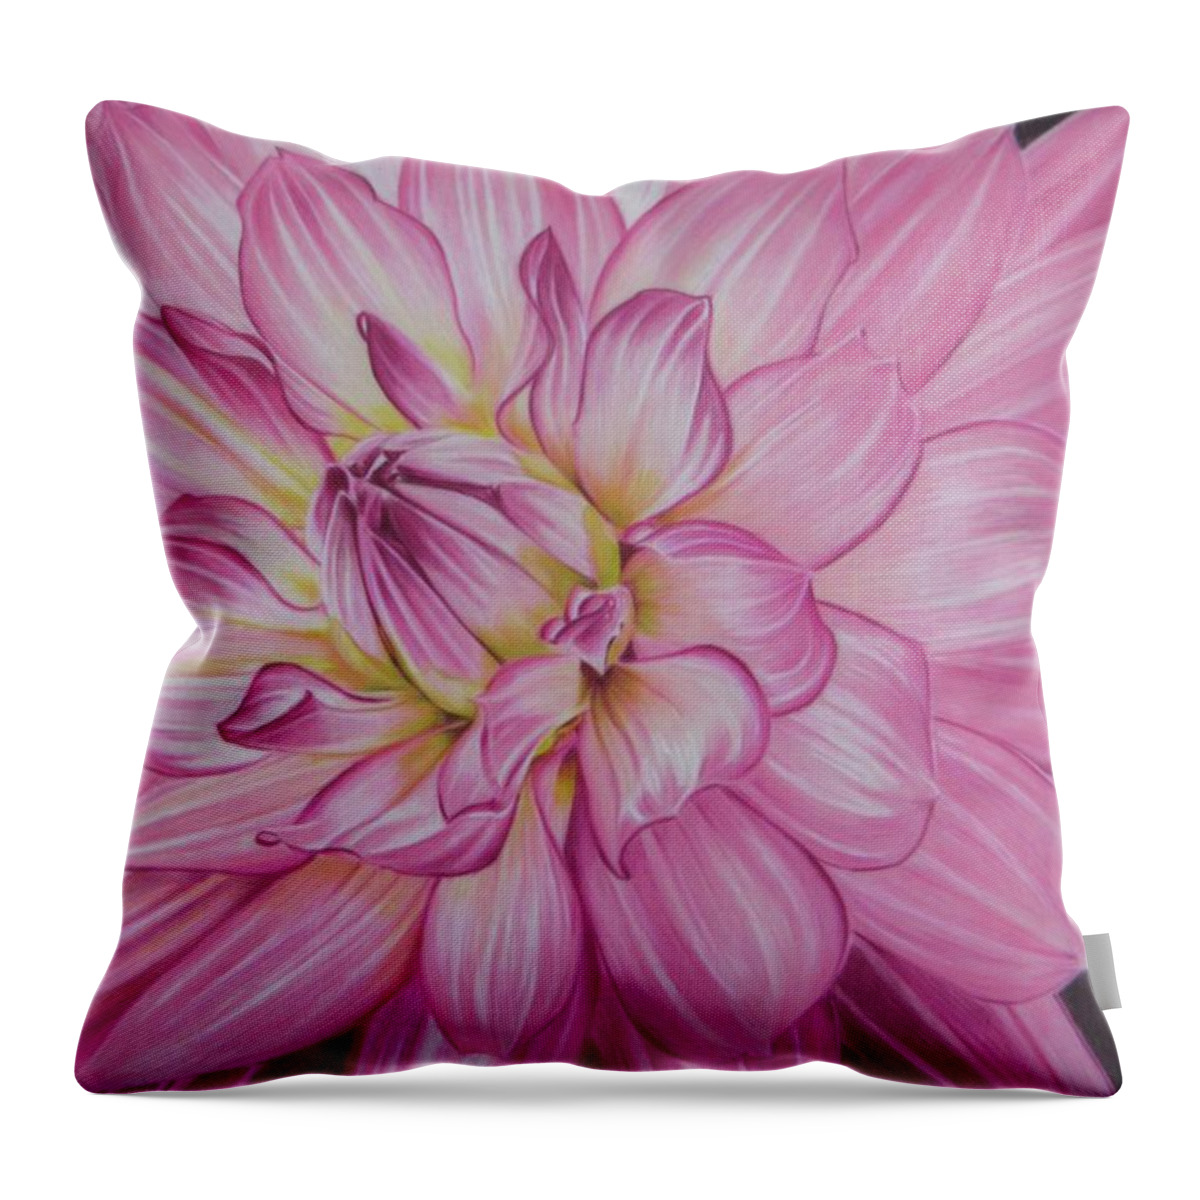 Dahlia Throw Pillow featuring the drawing Floral Burst by Kelly Speros